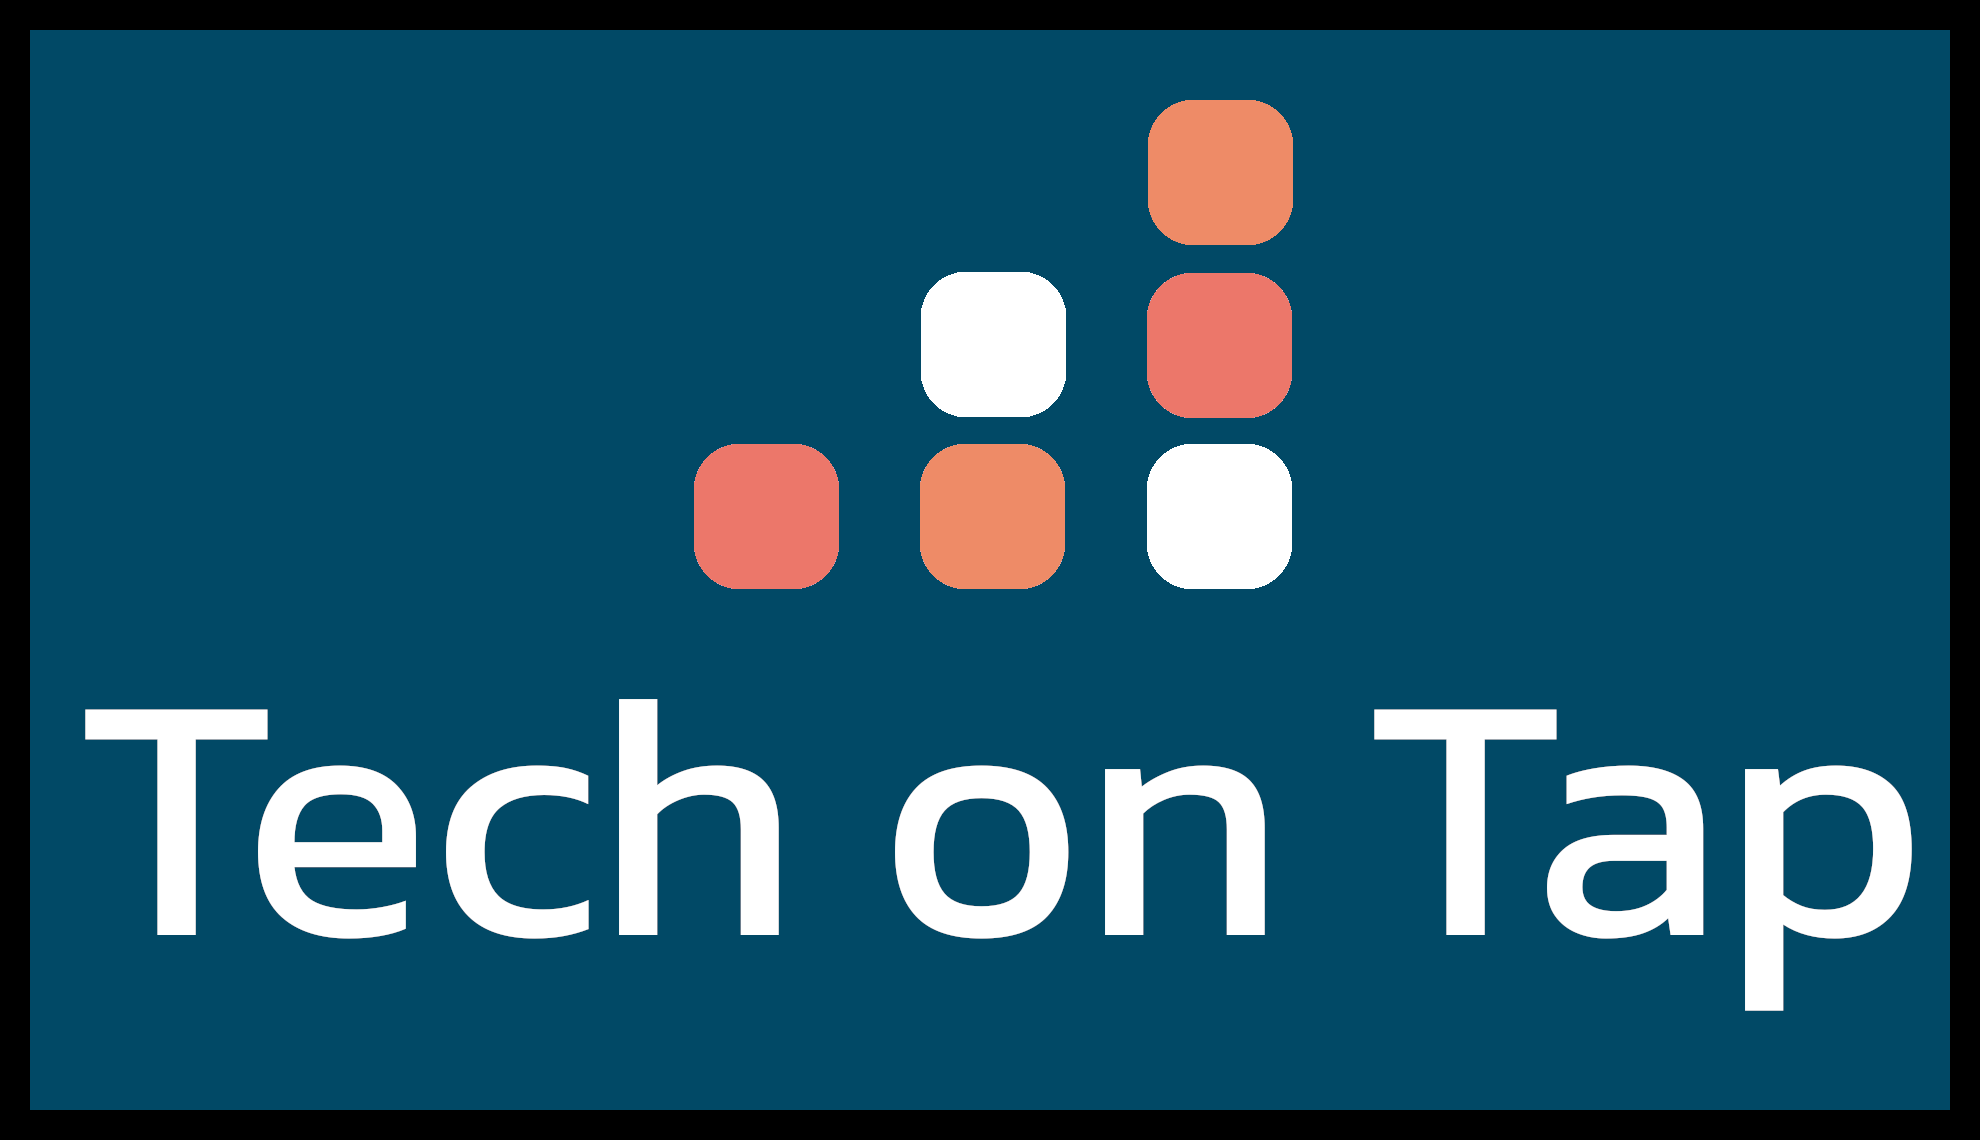 Tech on Tap Logo.  Steel Blue background with the writing Tech on Tap and a drawn logo of squares stacking up to denote progress